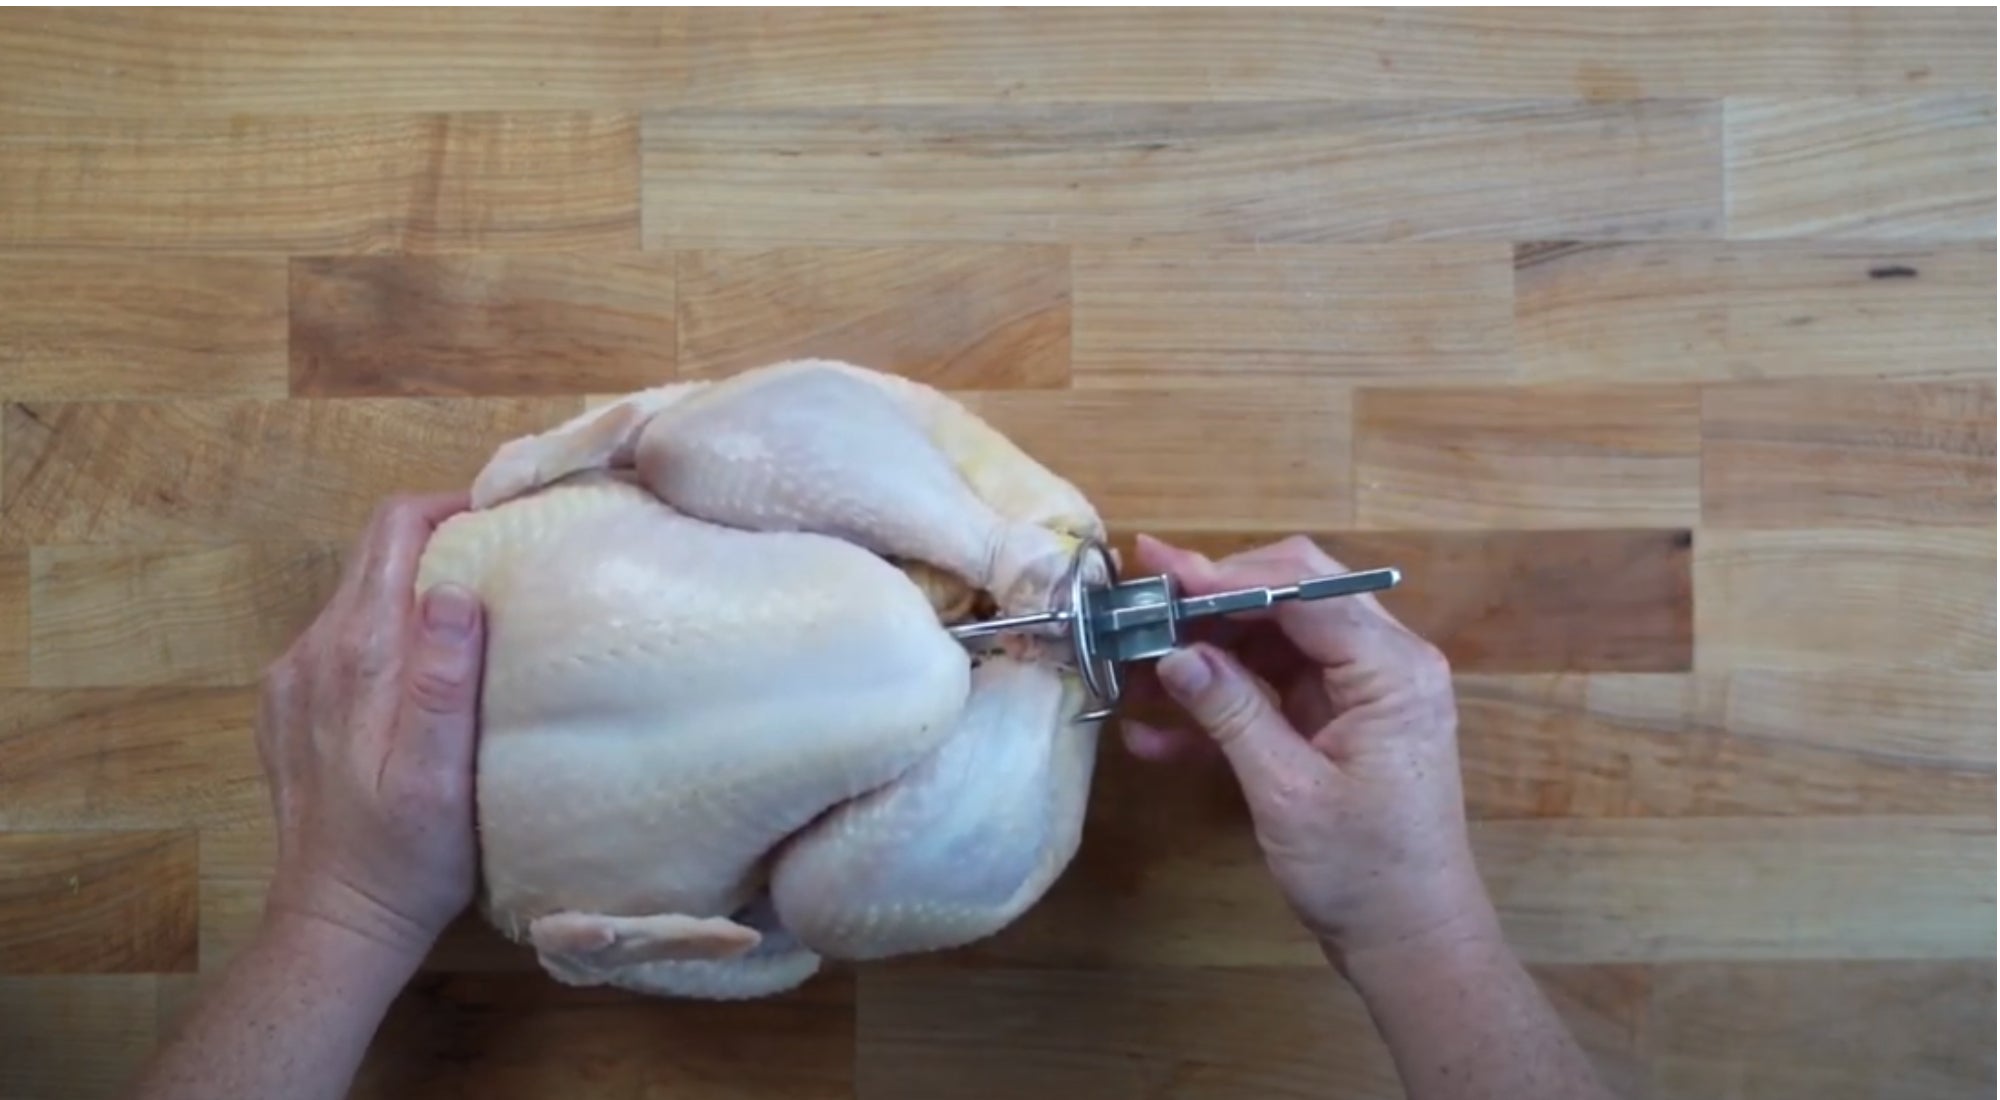 How To Install Your Rotisserie Chicken on the Rotisserie Spit